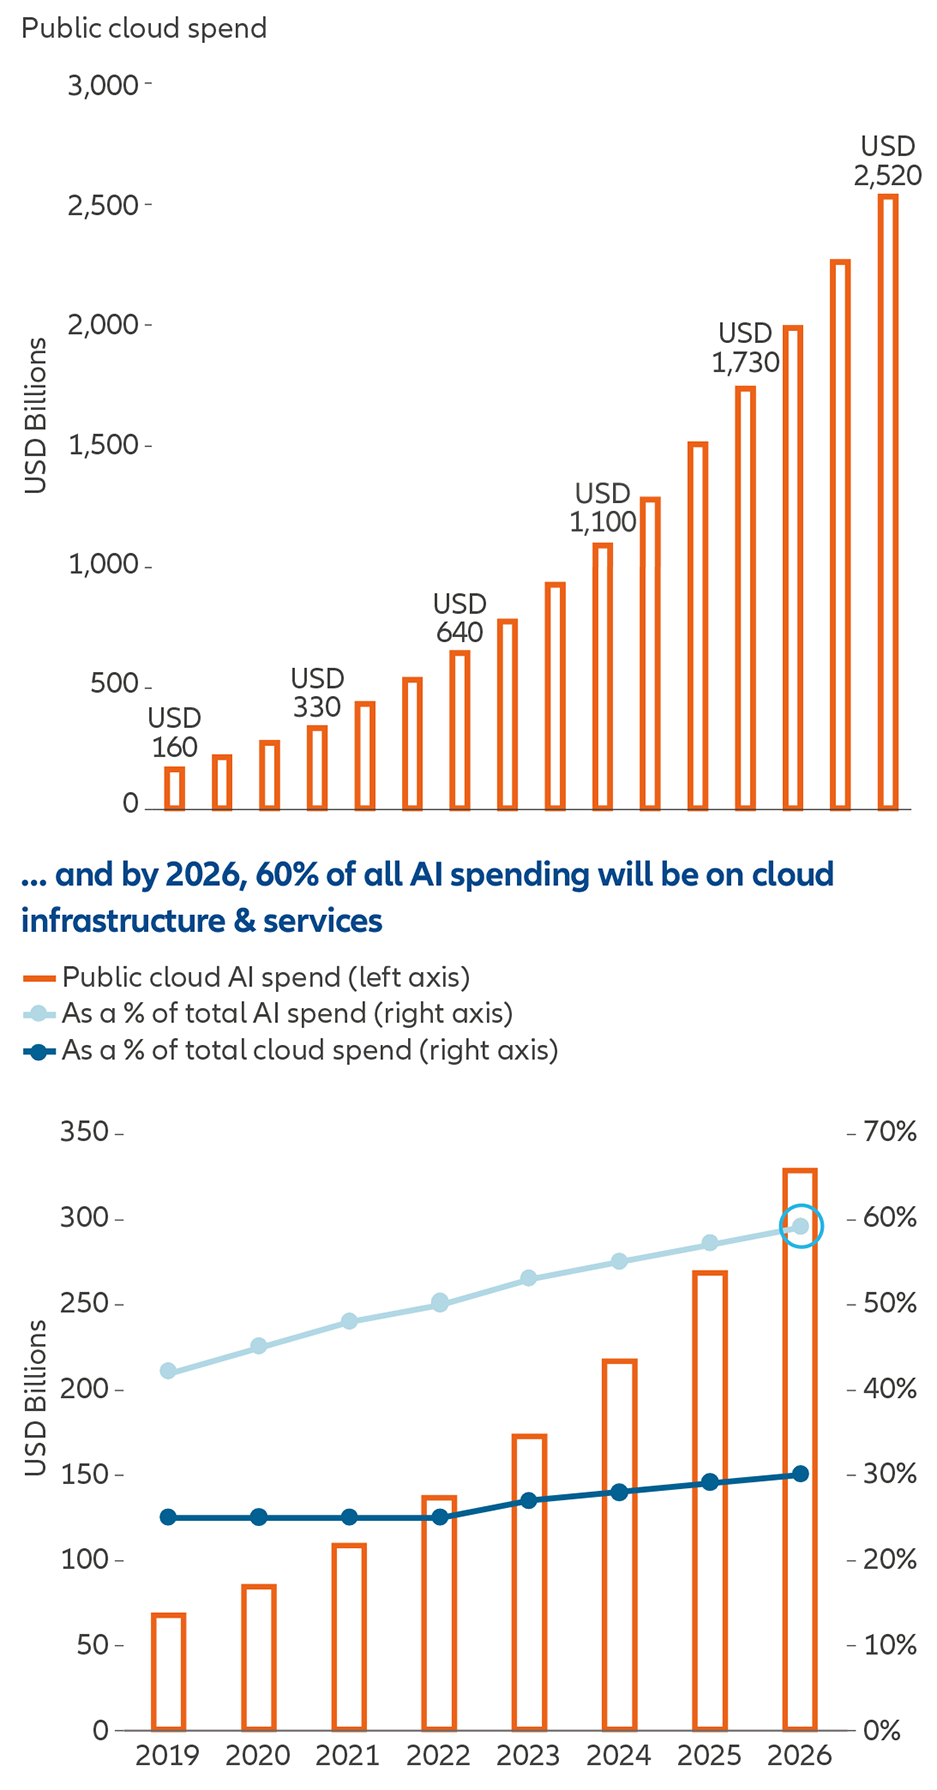  Exhibit 2: Overall public cloud spending is projected to rise steadily…